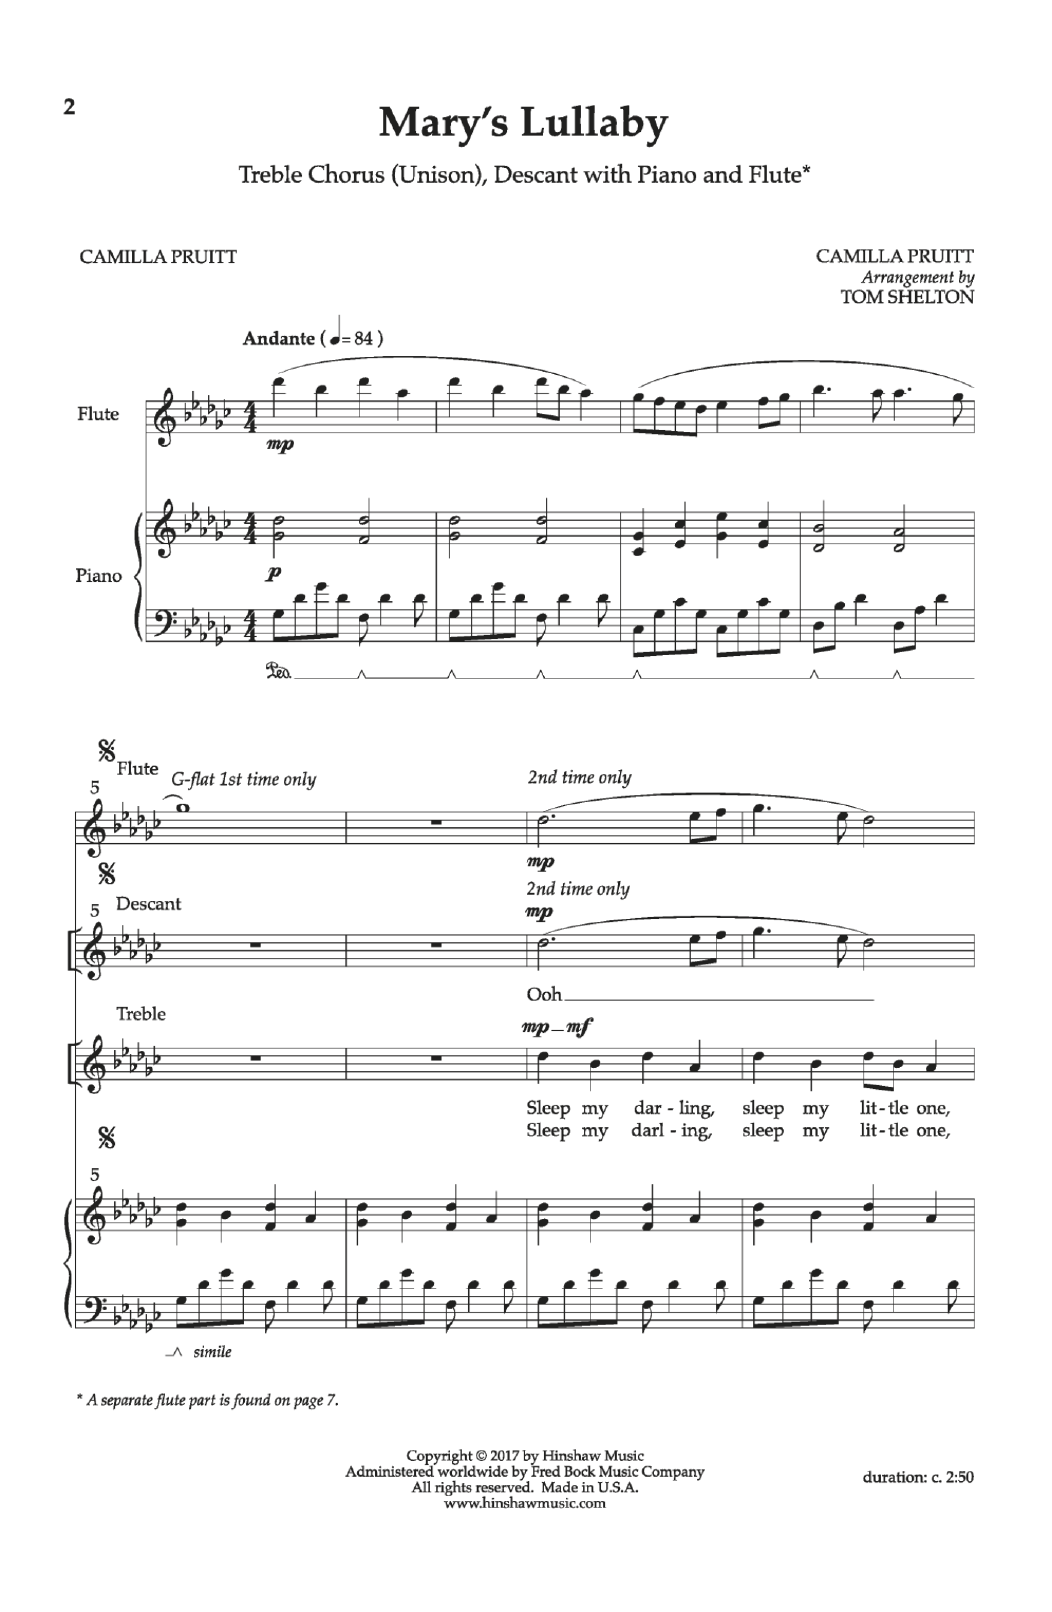 Download Camilla Pruitt Mary's Lullaby Sheet Music